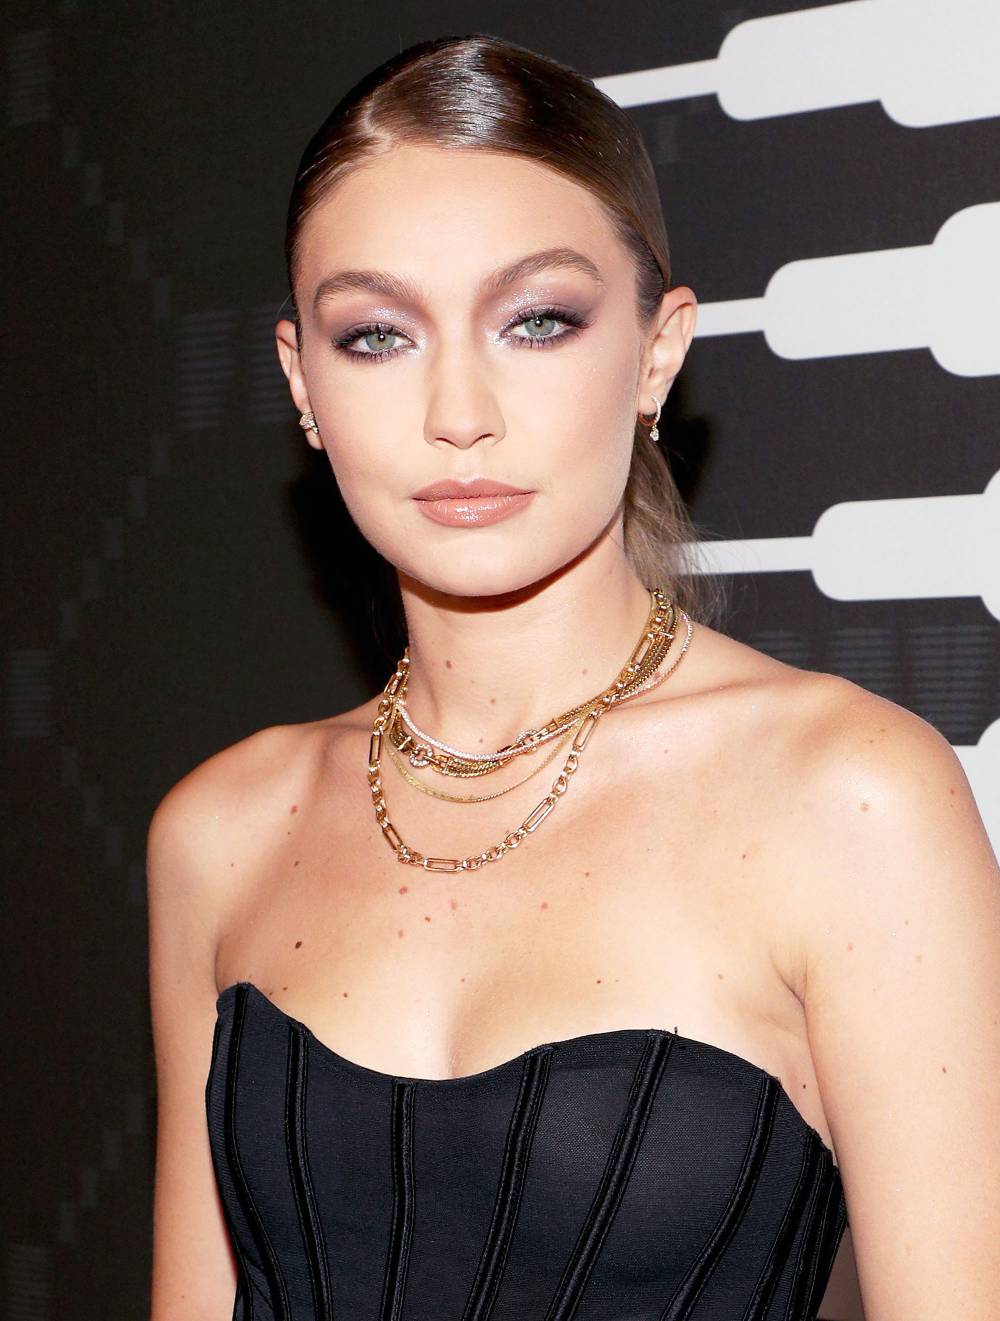 Gigi Hadid Says She's Never Had Filler in Her Cheeks